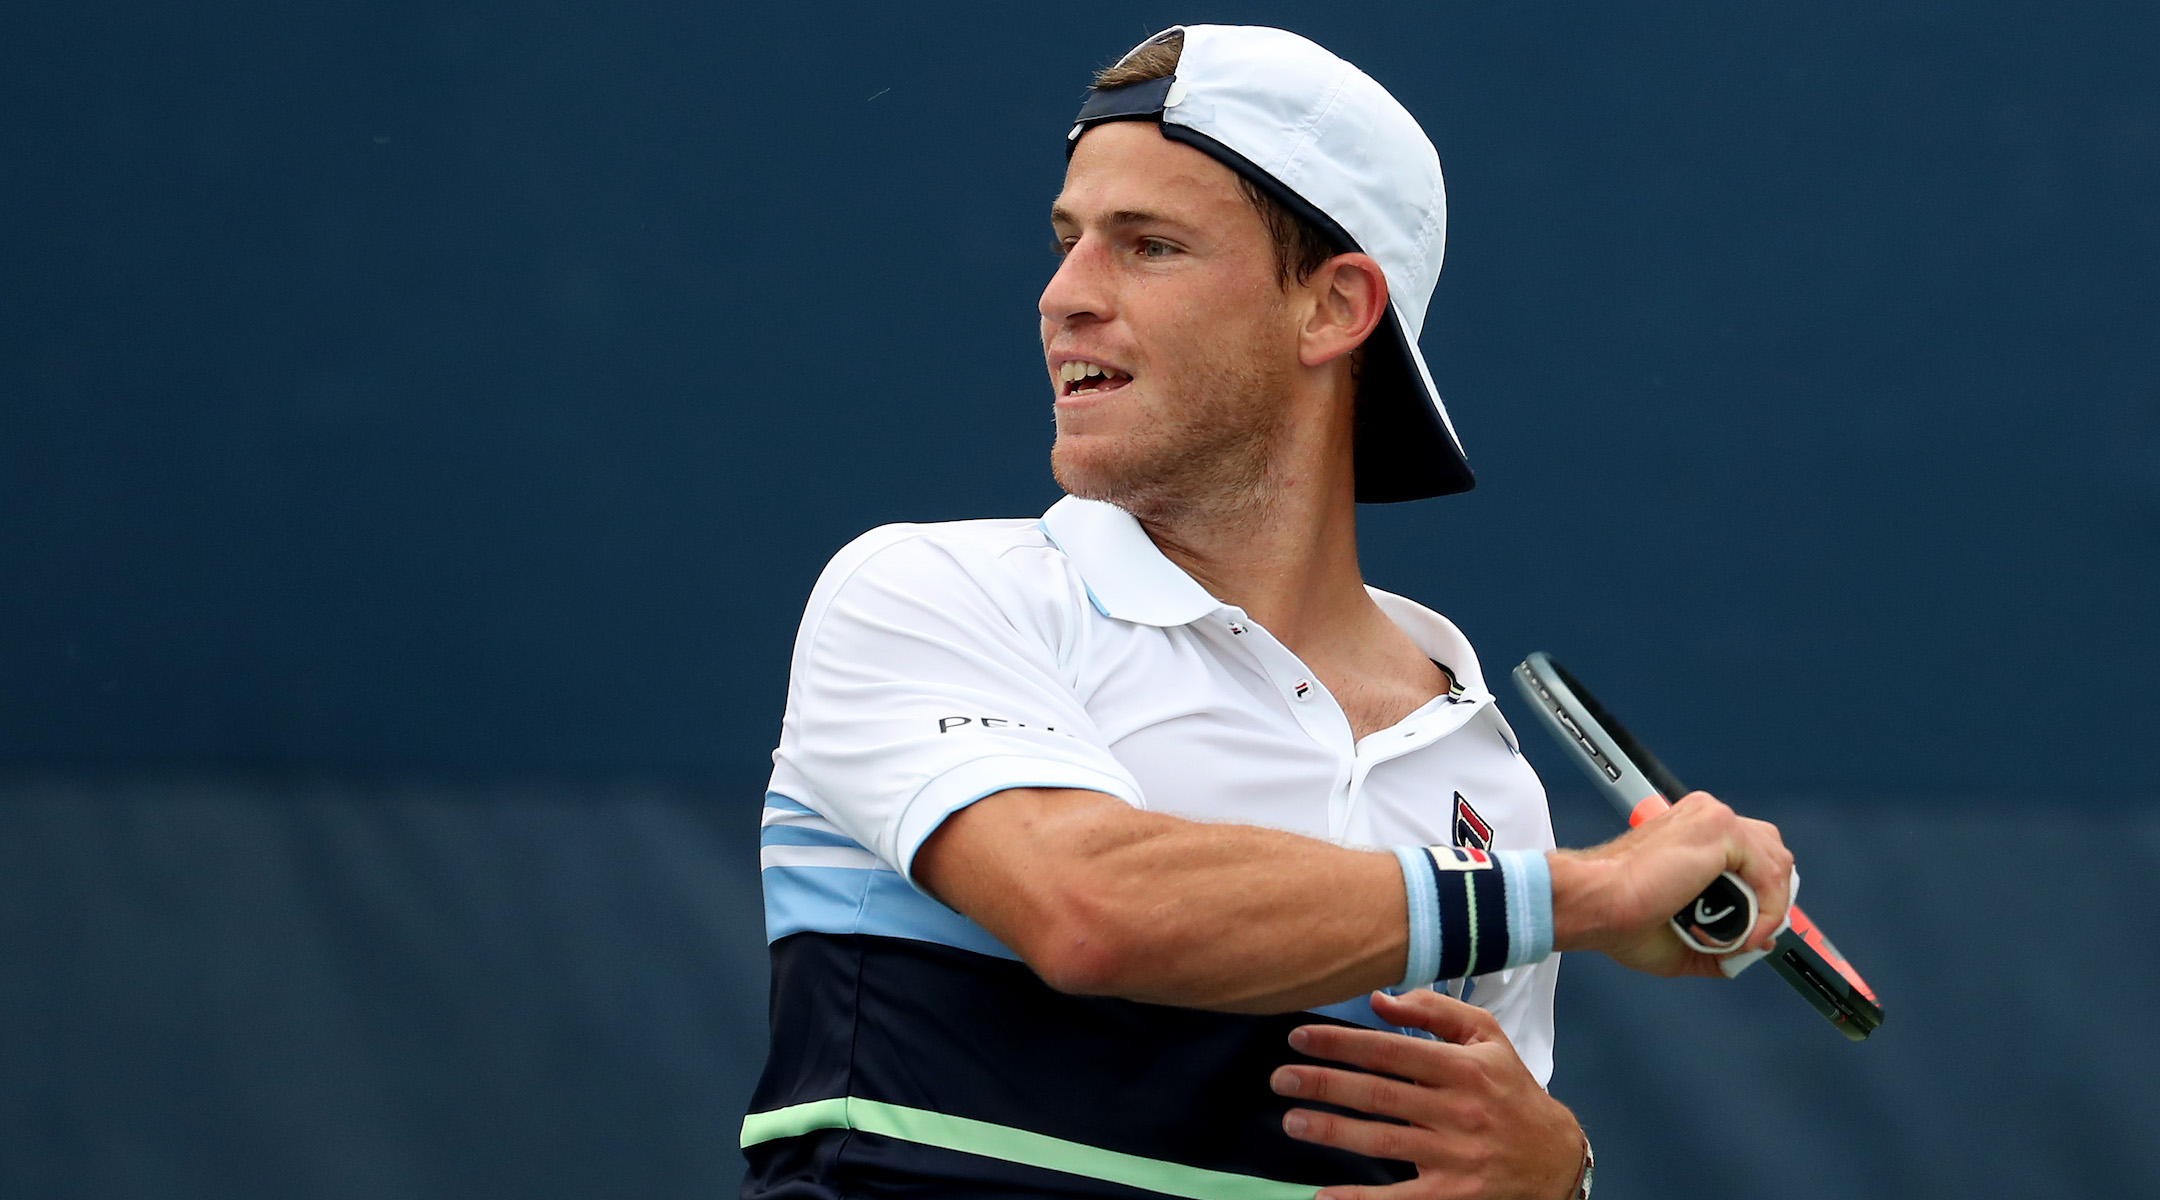 Diego Schwartzman returns a shot during his match against Robin Haase on day two of the 2019 US Open at the USTA Billie Jean King National Tennis Center in Queens, New York City, Aug. 27, 2019. (Al Bello/Getty Images)